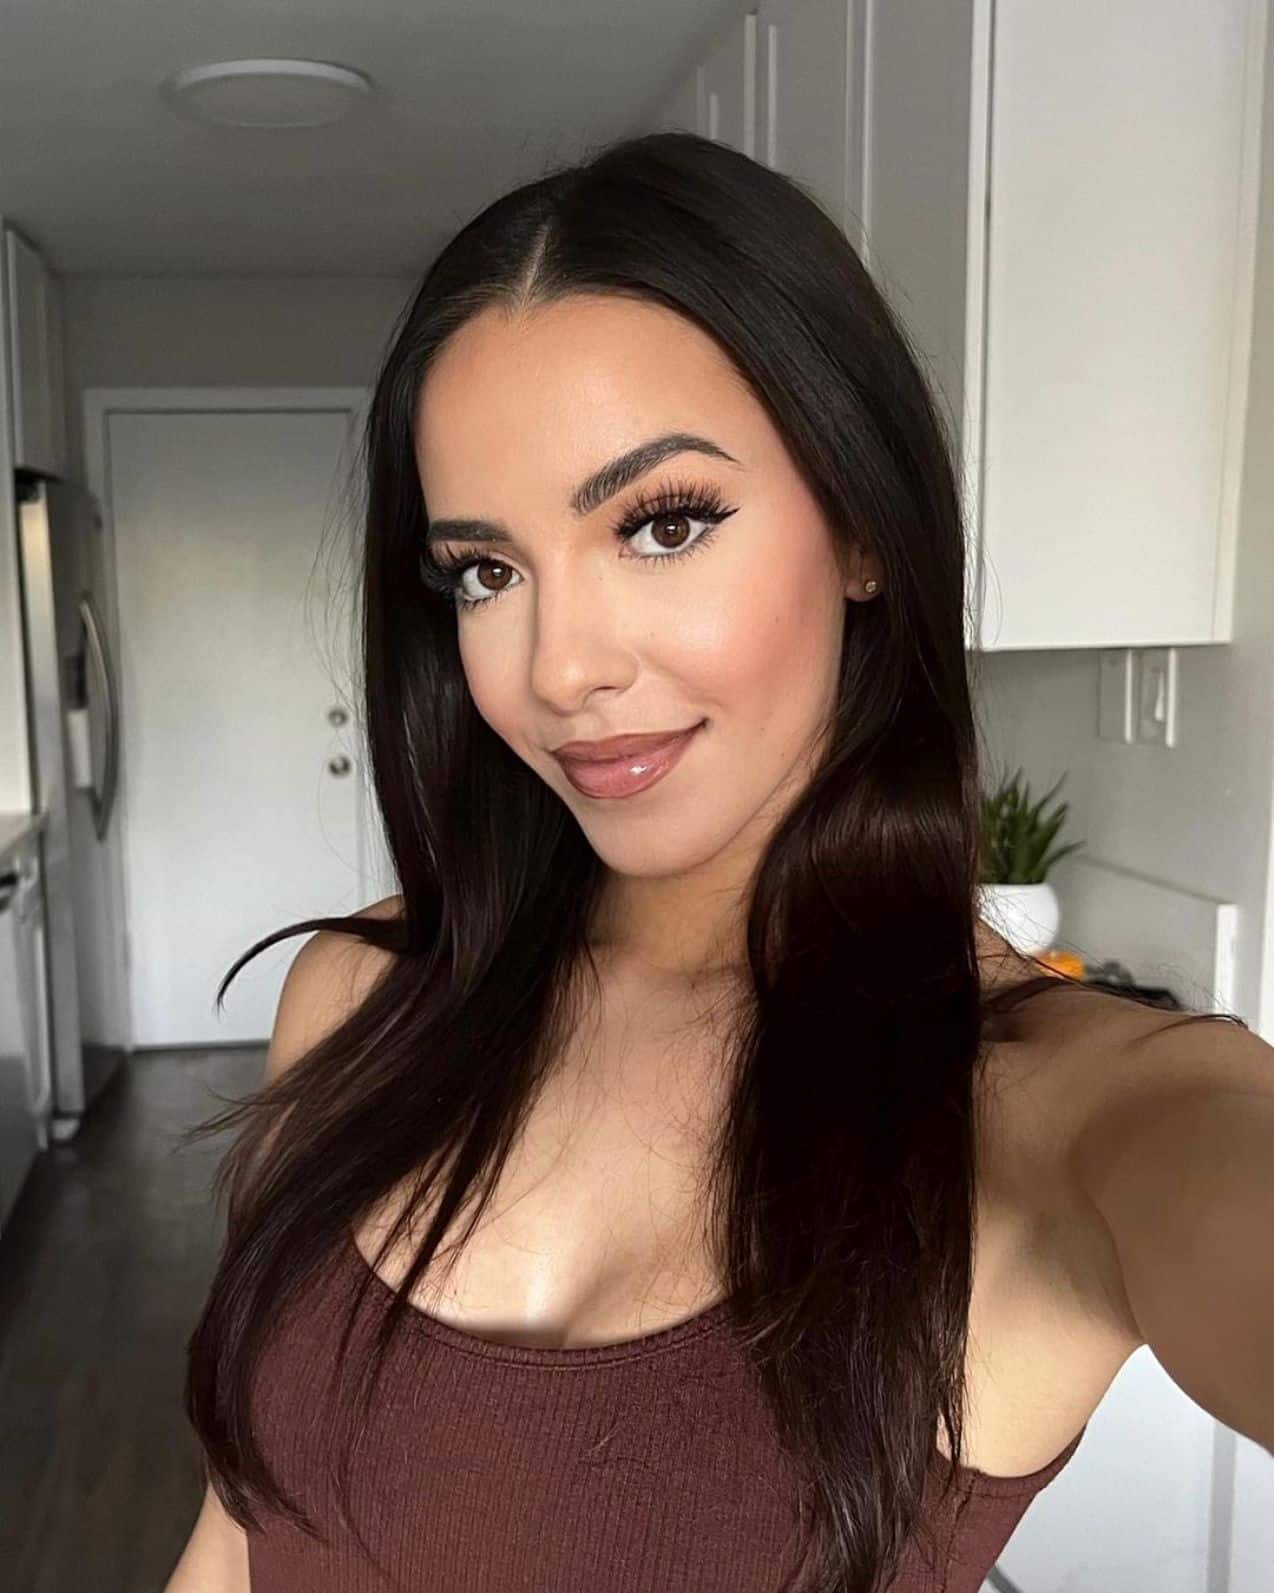 Charli Burnett Says She's the Only Pump Rules Cast Member Working at SUR, Reveals Why She Was Missing From Episodes, and Claps Back at Claims of Being "Immature and Boring"